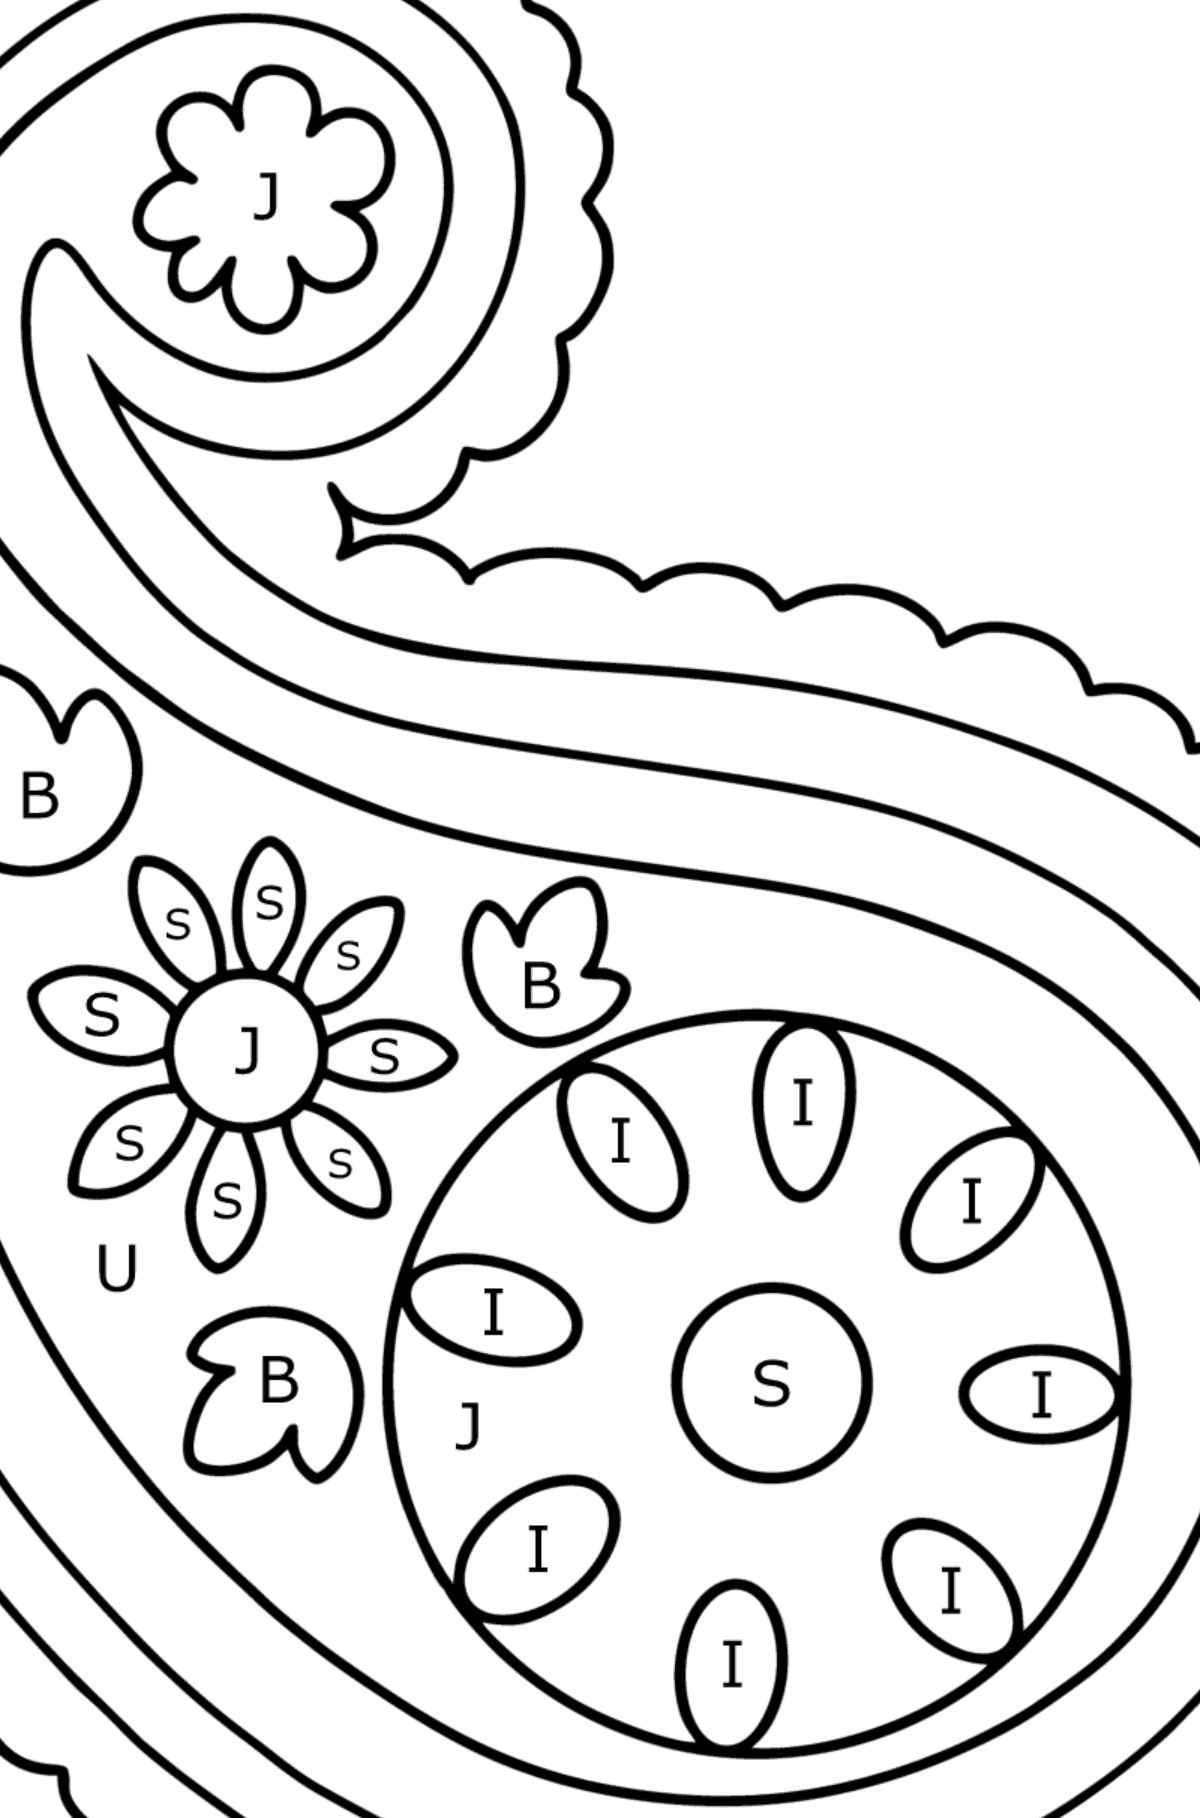 Cute Paisley coloring page - Coloring by Letters for Kids